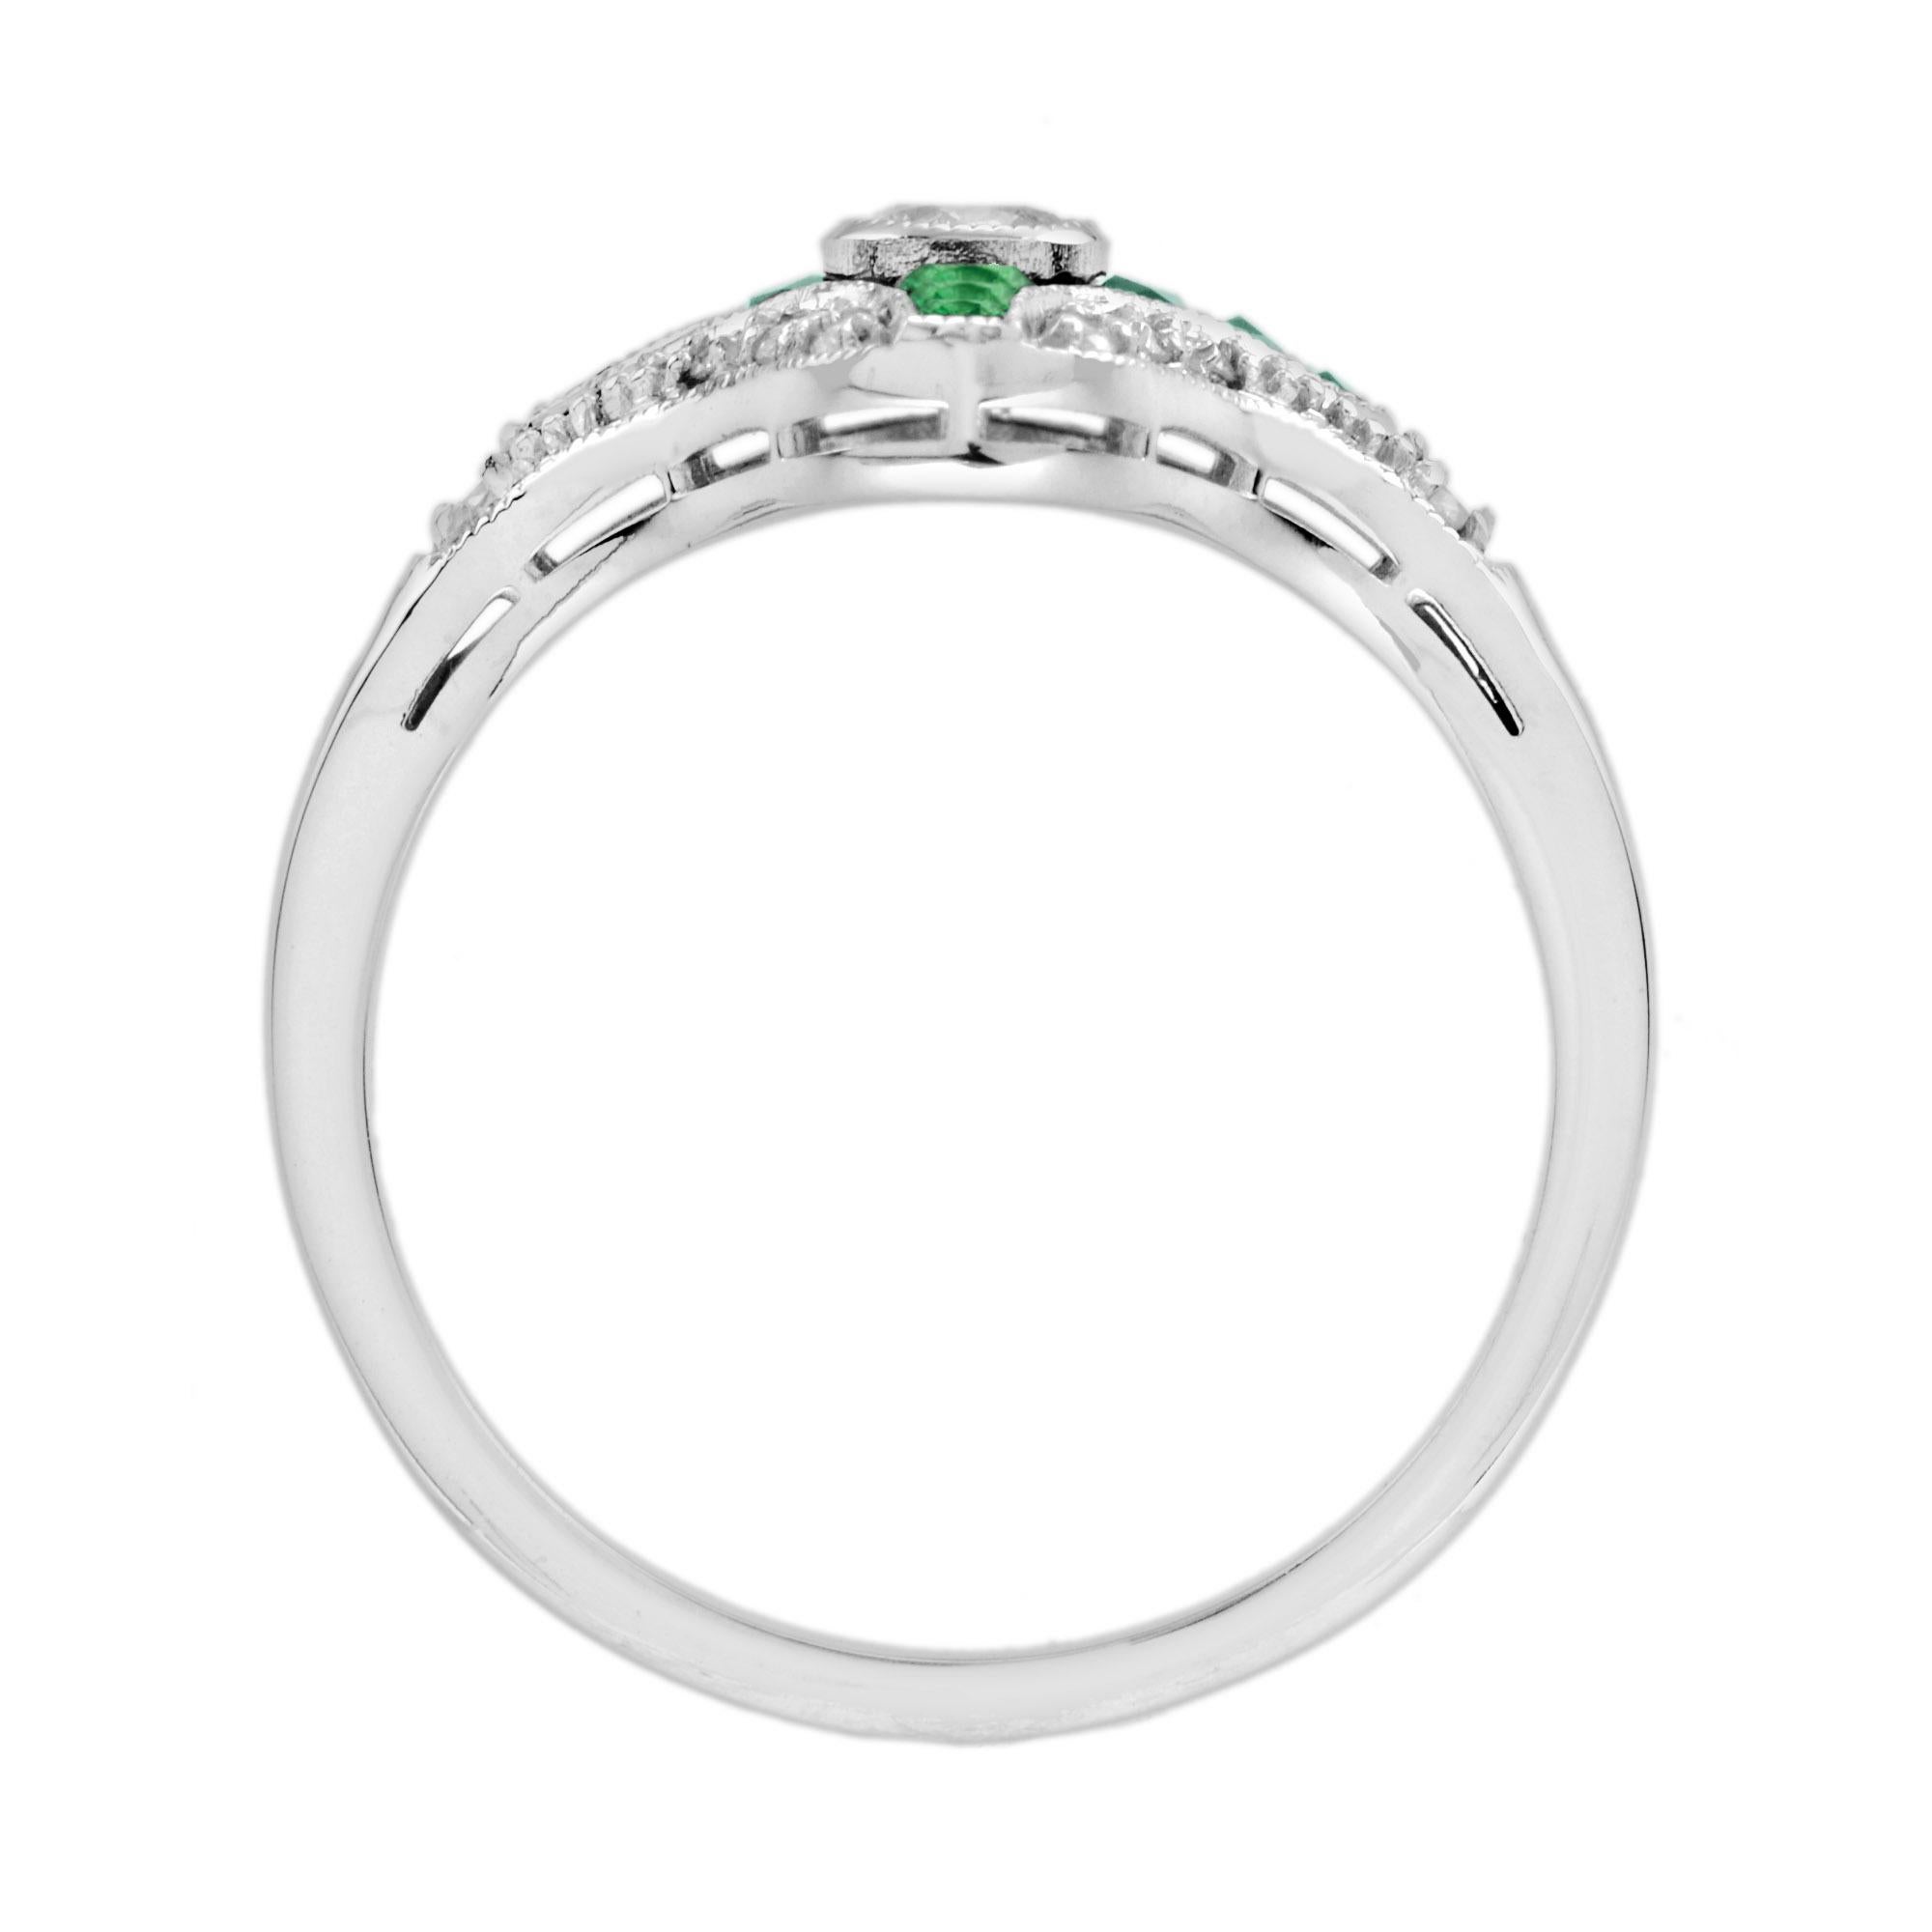 For Sale:  Diamond and Emerald Art Deco Style Ring in 14K white Gold 6